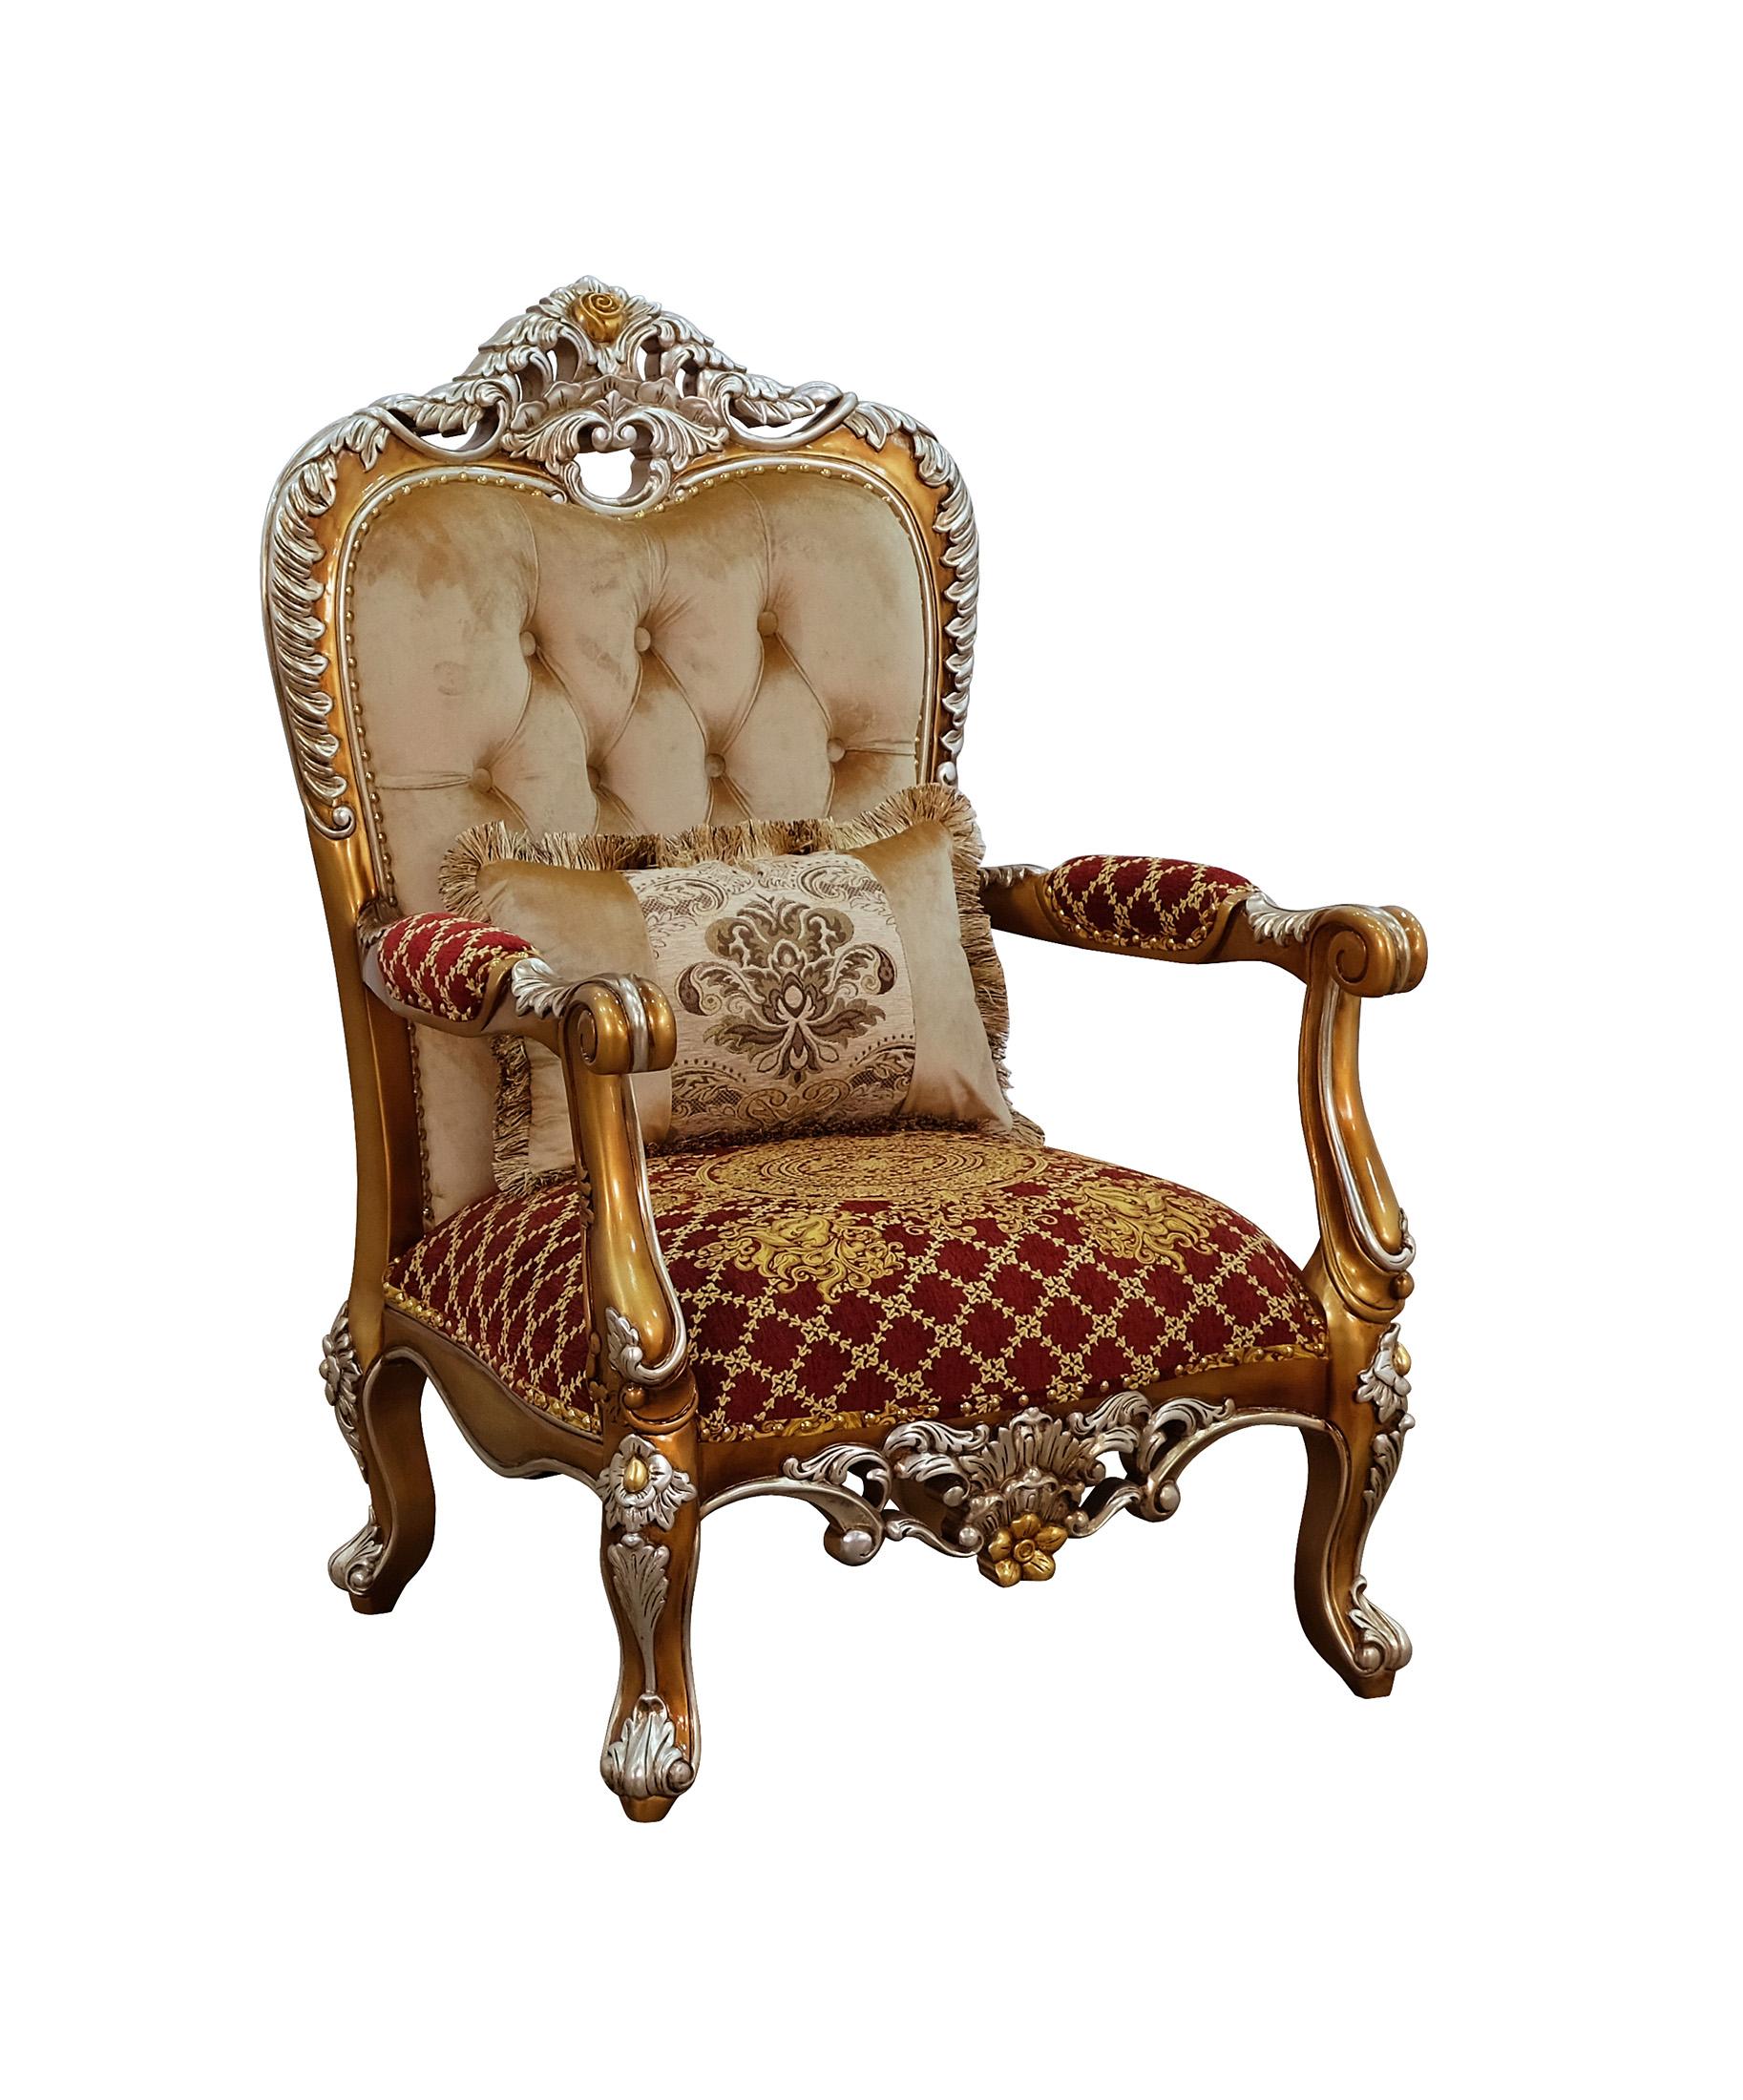 Classic, Traditional Arm Chair SAINT GERMAIN 35554-C in Sand, Red, Gold Fabric